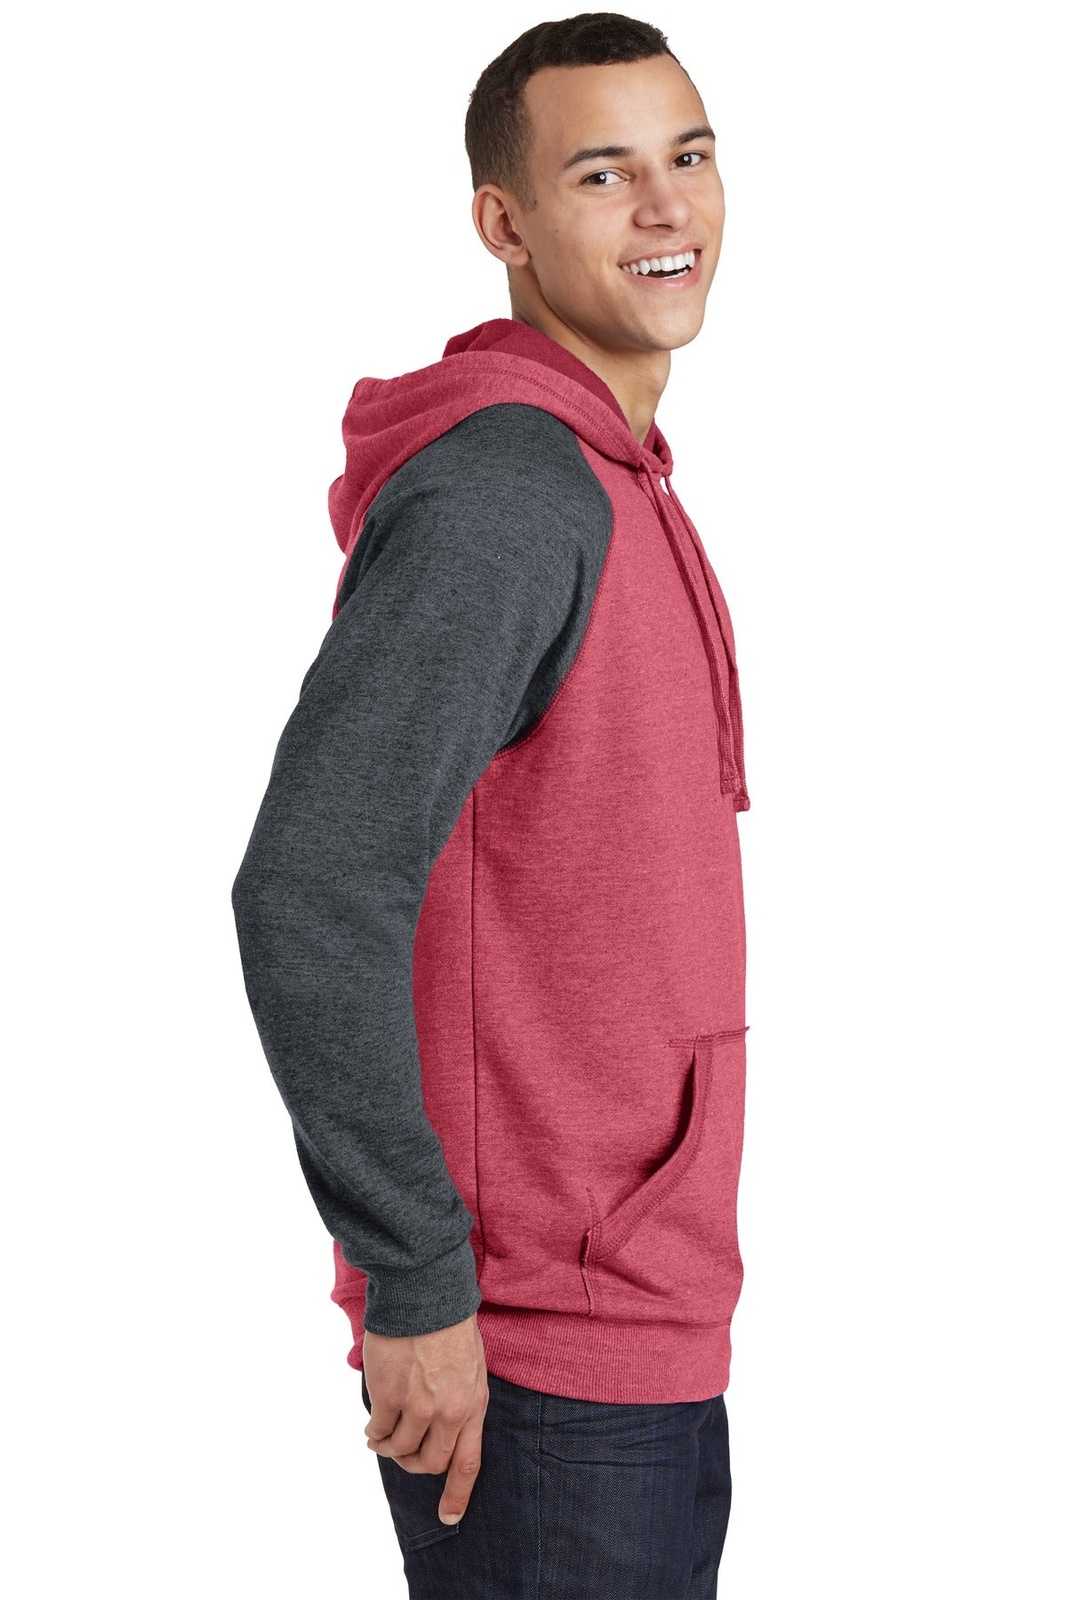 District DT196 Young Mens Lightweight Fleece Raglan Hoodie - Heathered Red Heathered Charcoal - HIT a Double - 3